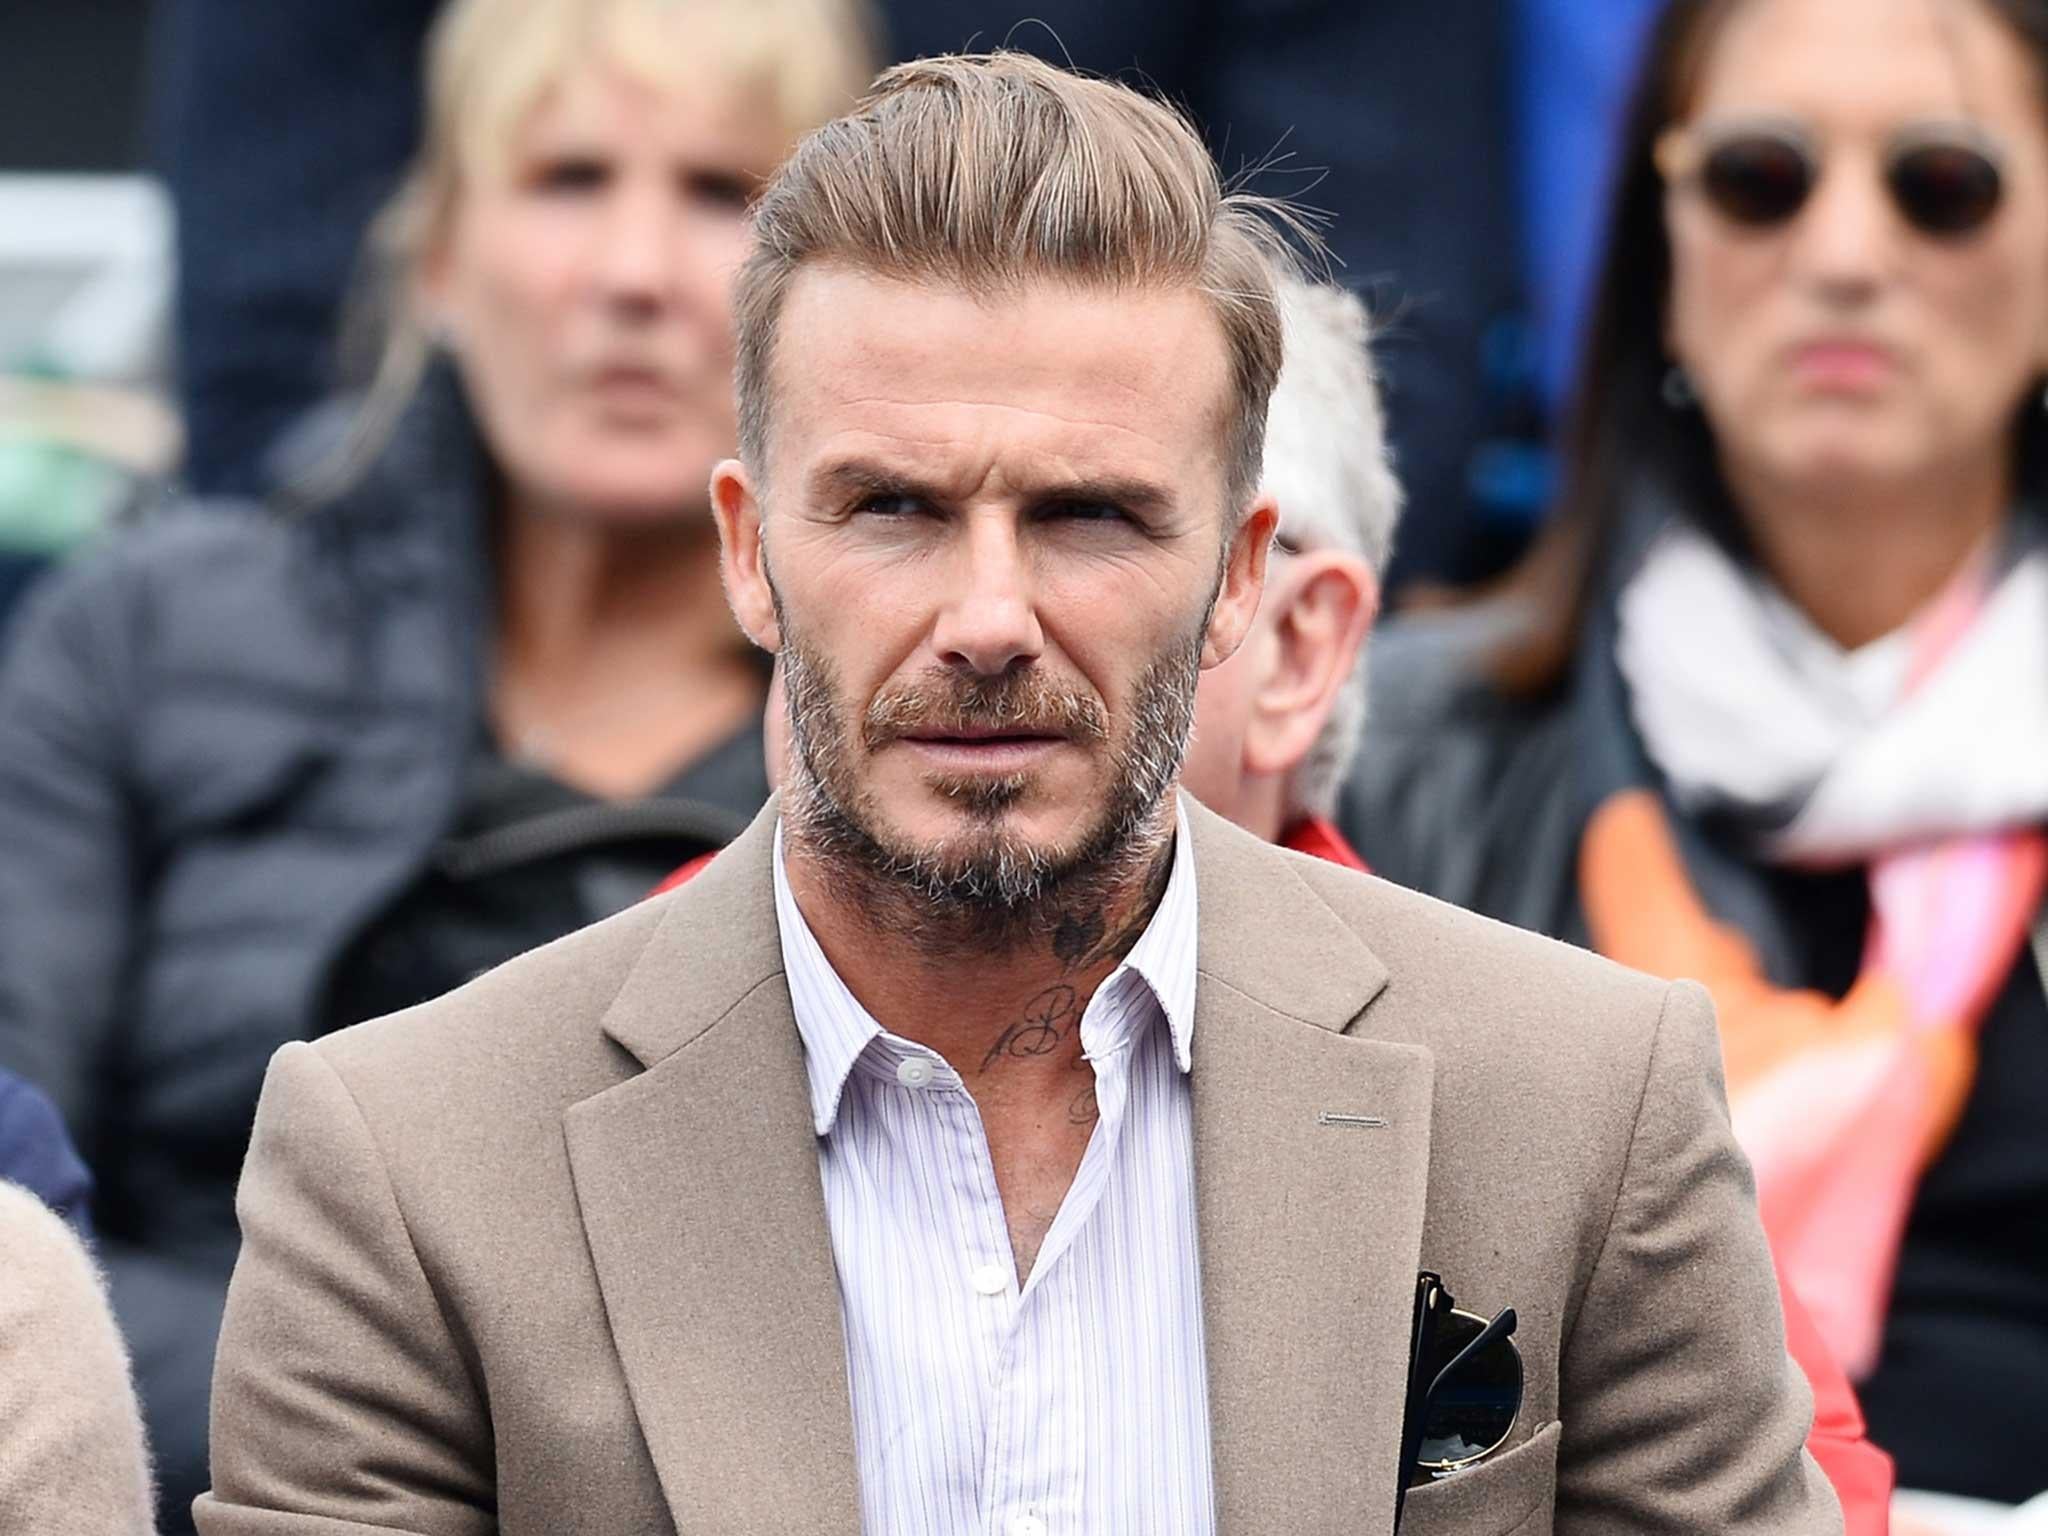 David Beckham is caught in a media firestorm after leaked emails allegedly show he used his charity work as part of a campaign to win a knighthood